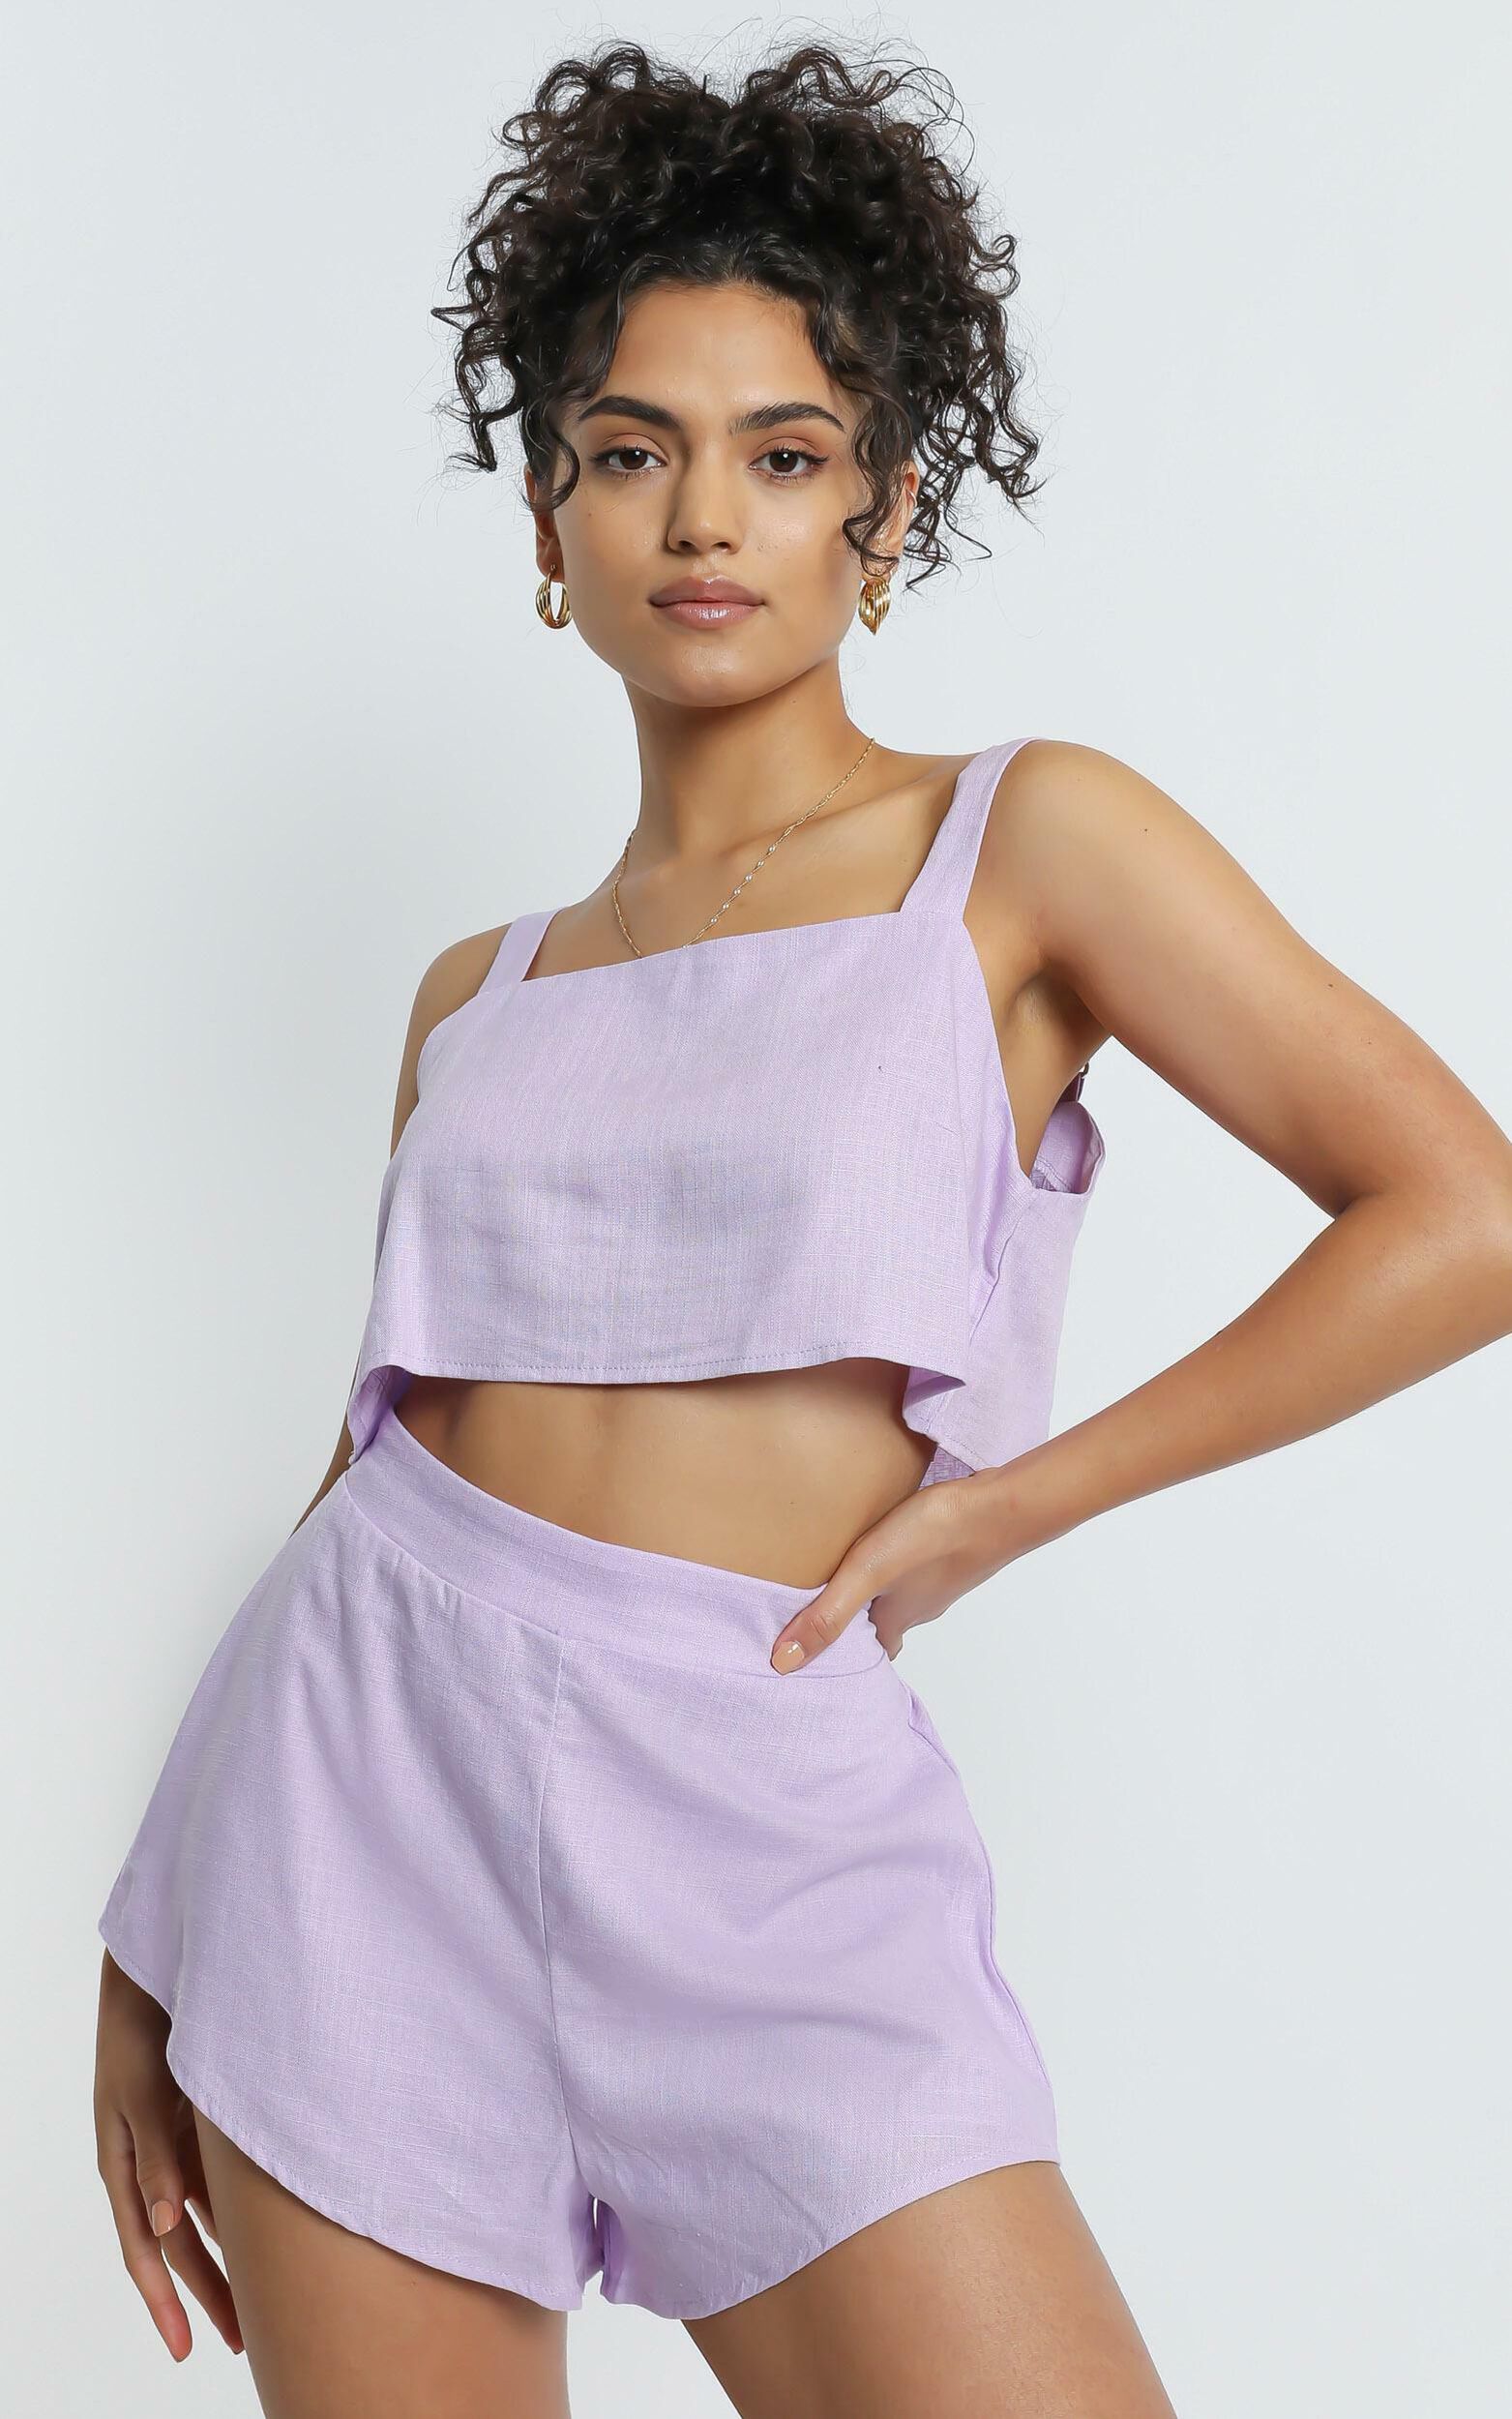 Zanrie Square Neck Crop Top and High Waist Mini Flare Shorts in Lilac Linen Look - 04, PRP6